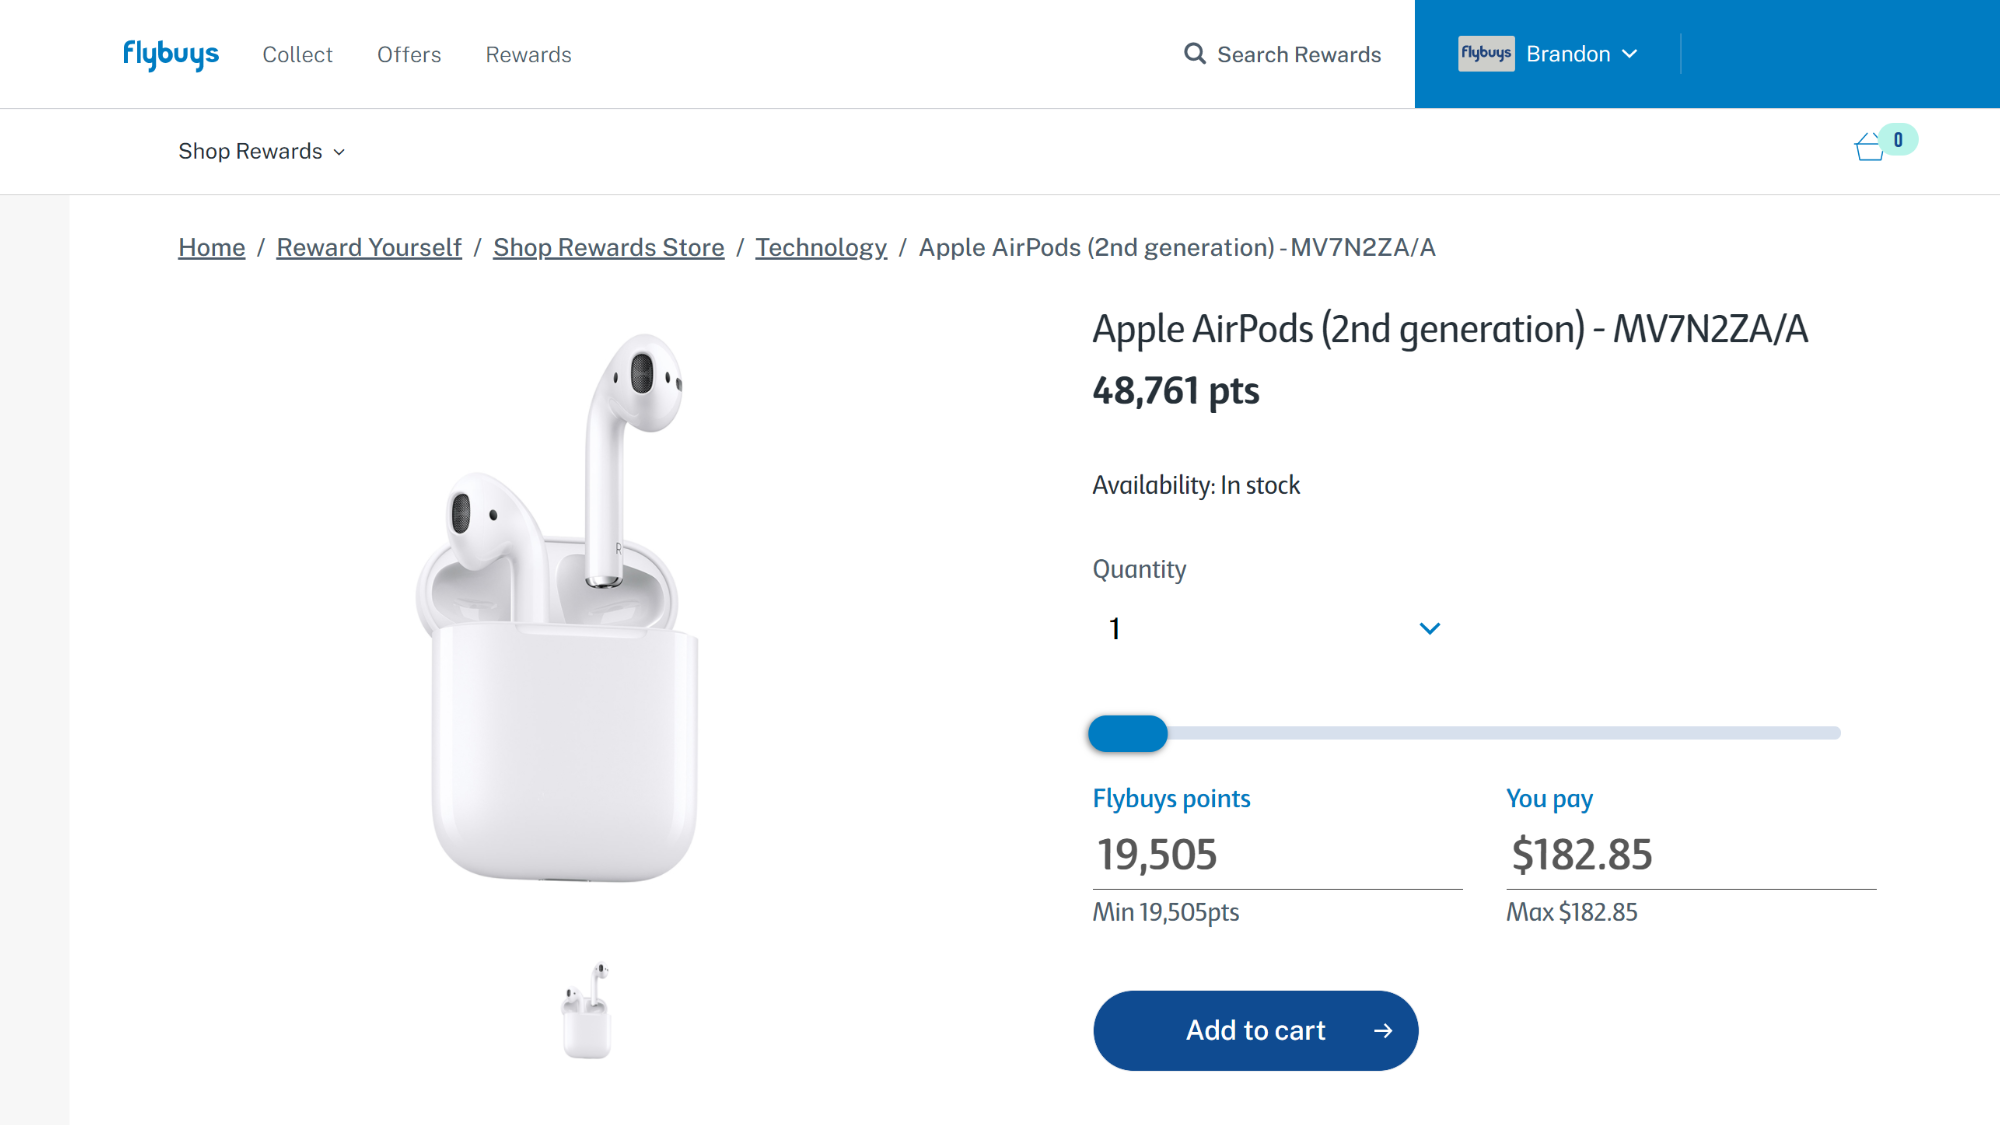 Apple Airpods Flybuys Rewards - Point Hacks